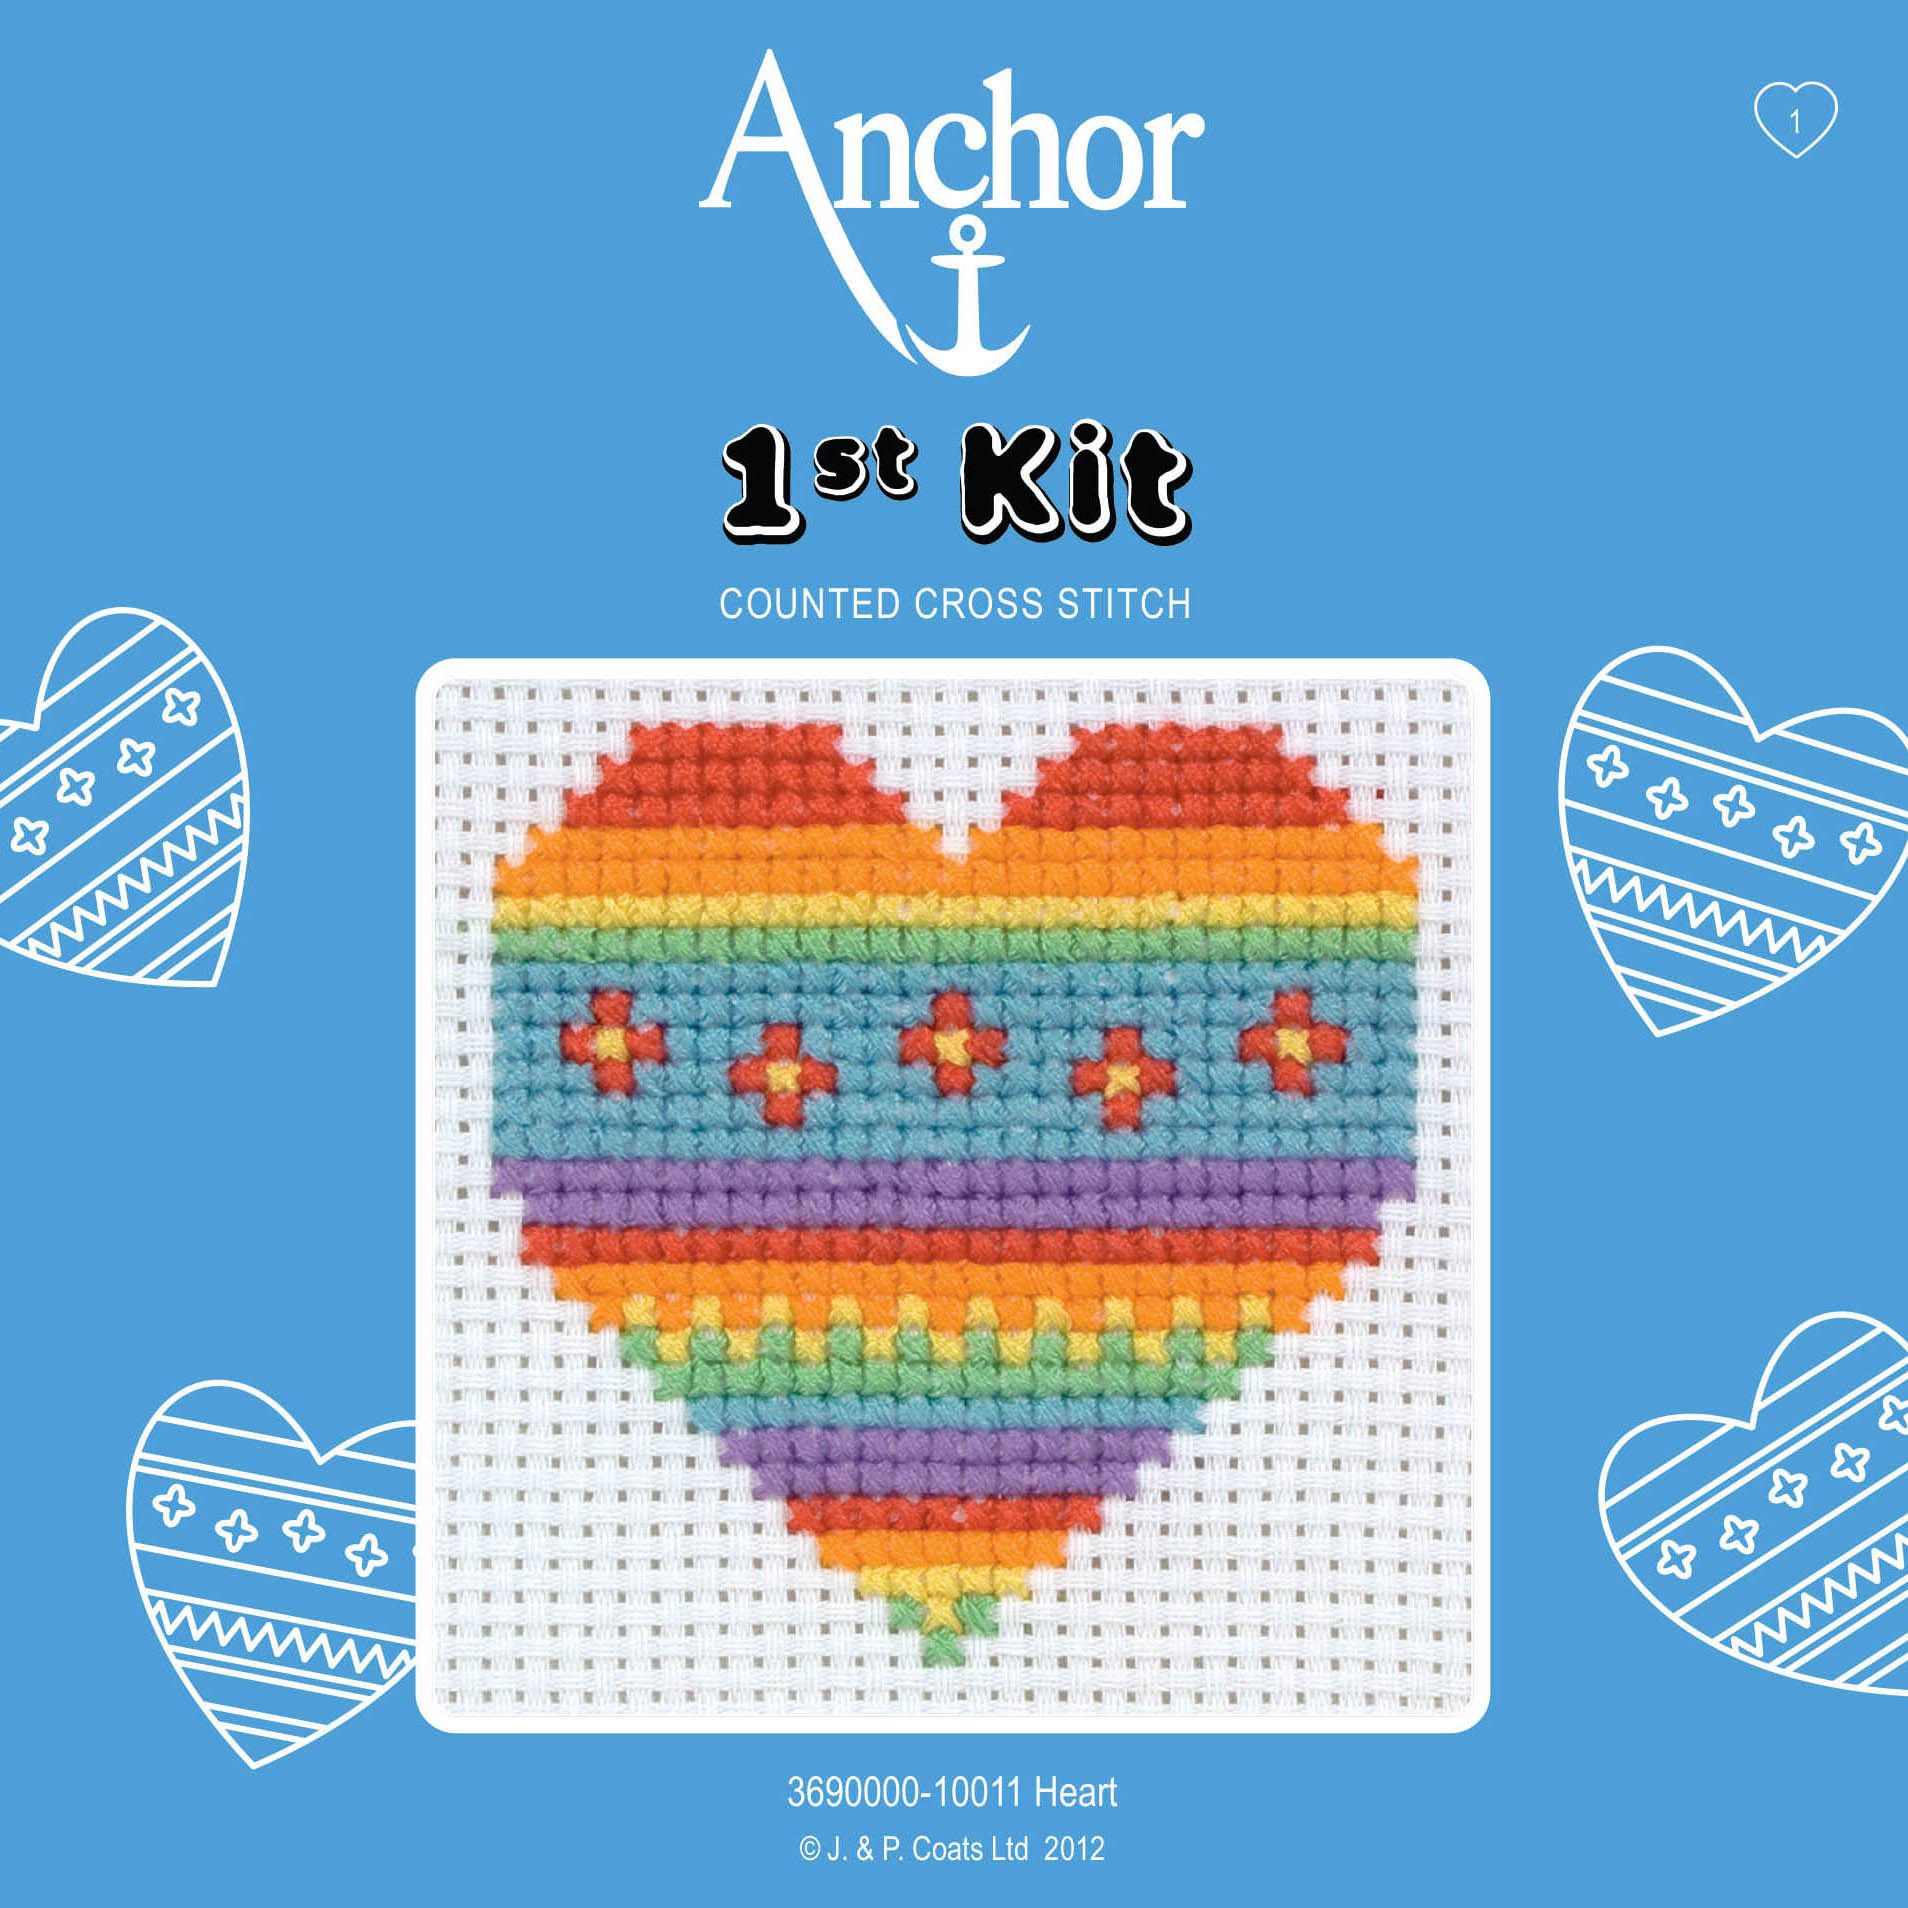 Anchor 1st Counted Cross Stitch Kit - Heart product image